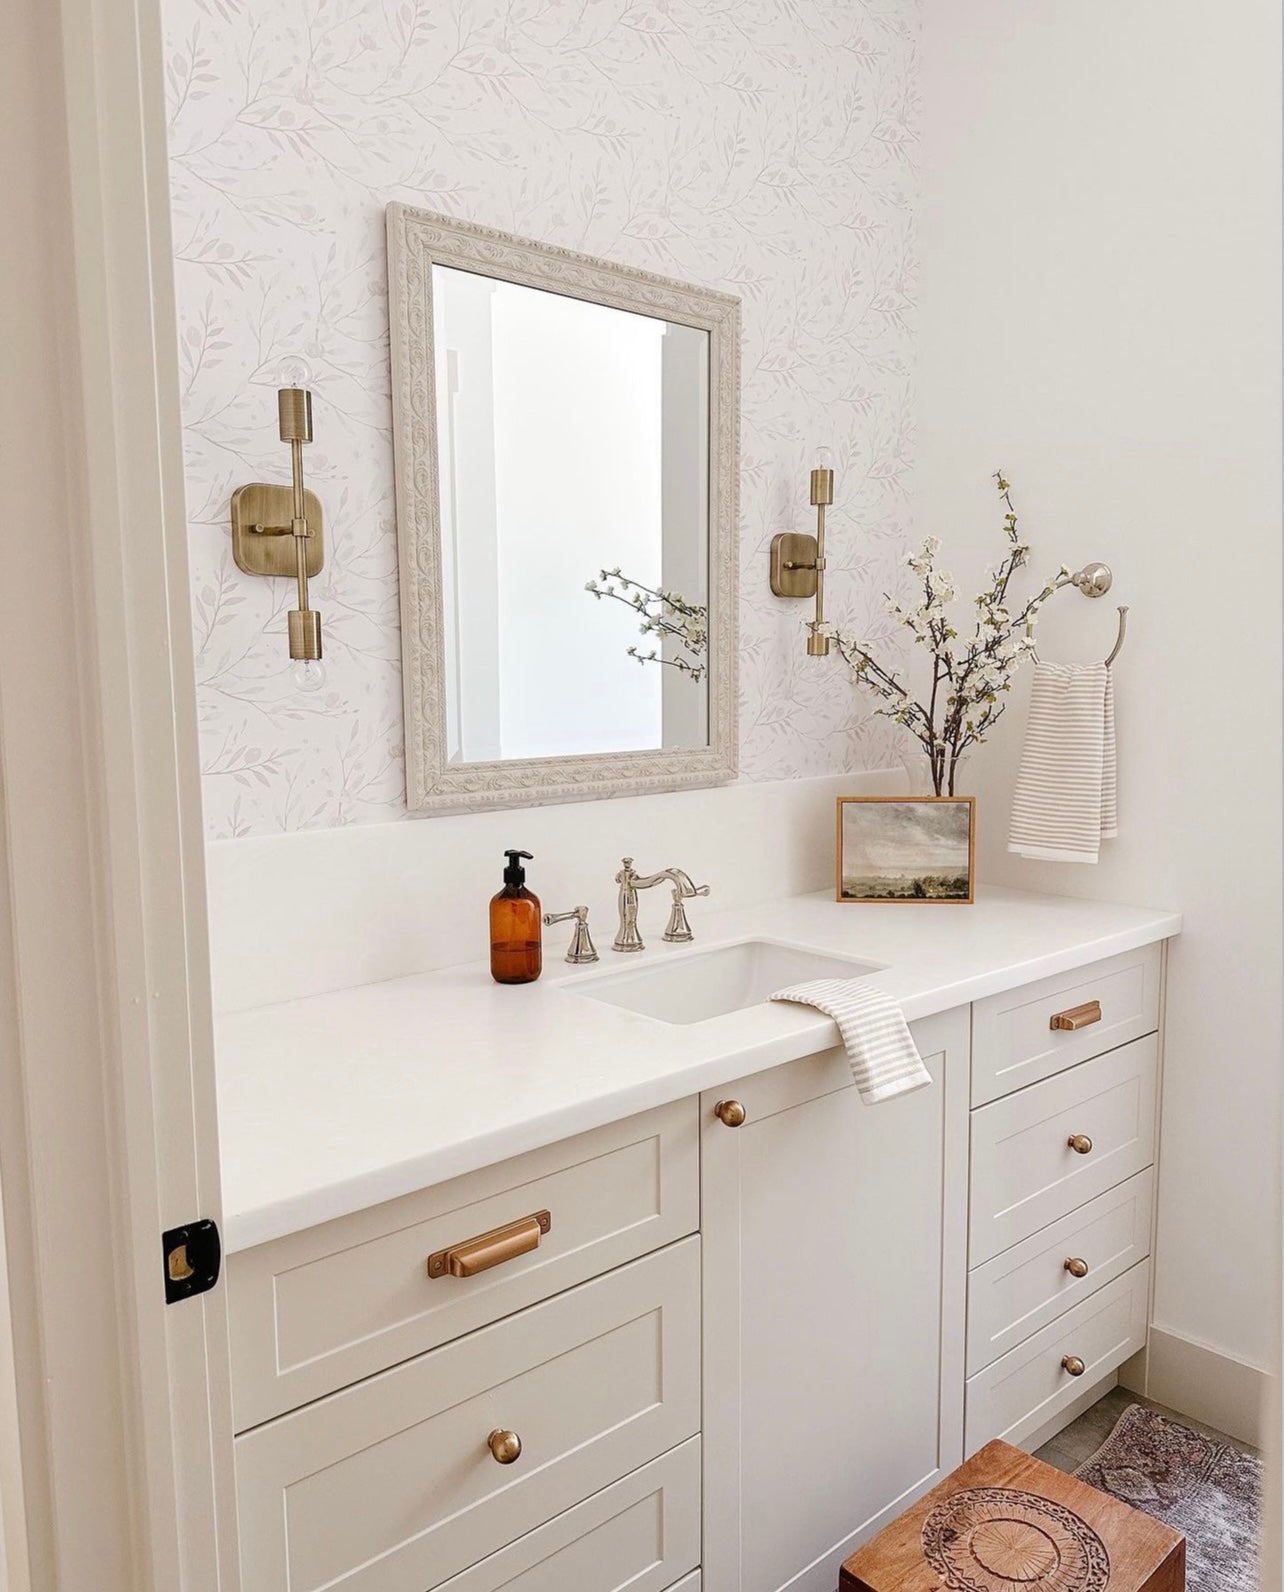 An elegant bathroom vanity with brass fixtures and framed mirror, complemented by the 'Spring Bird' wallpaper’s subtle, nature-inspired design